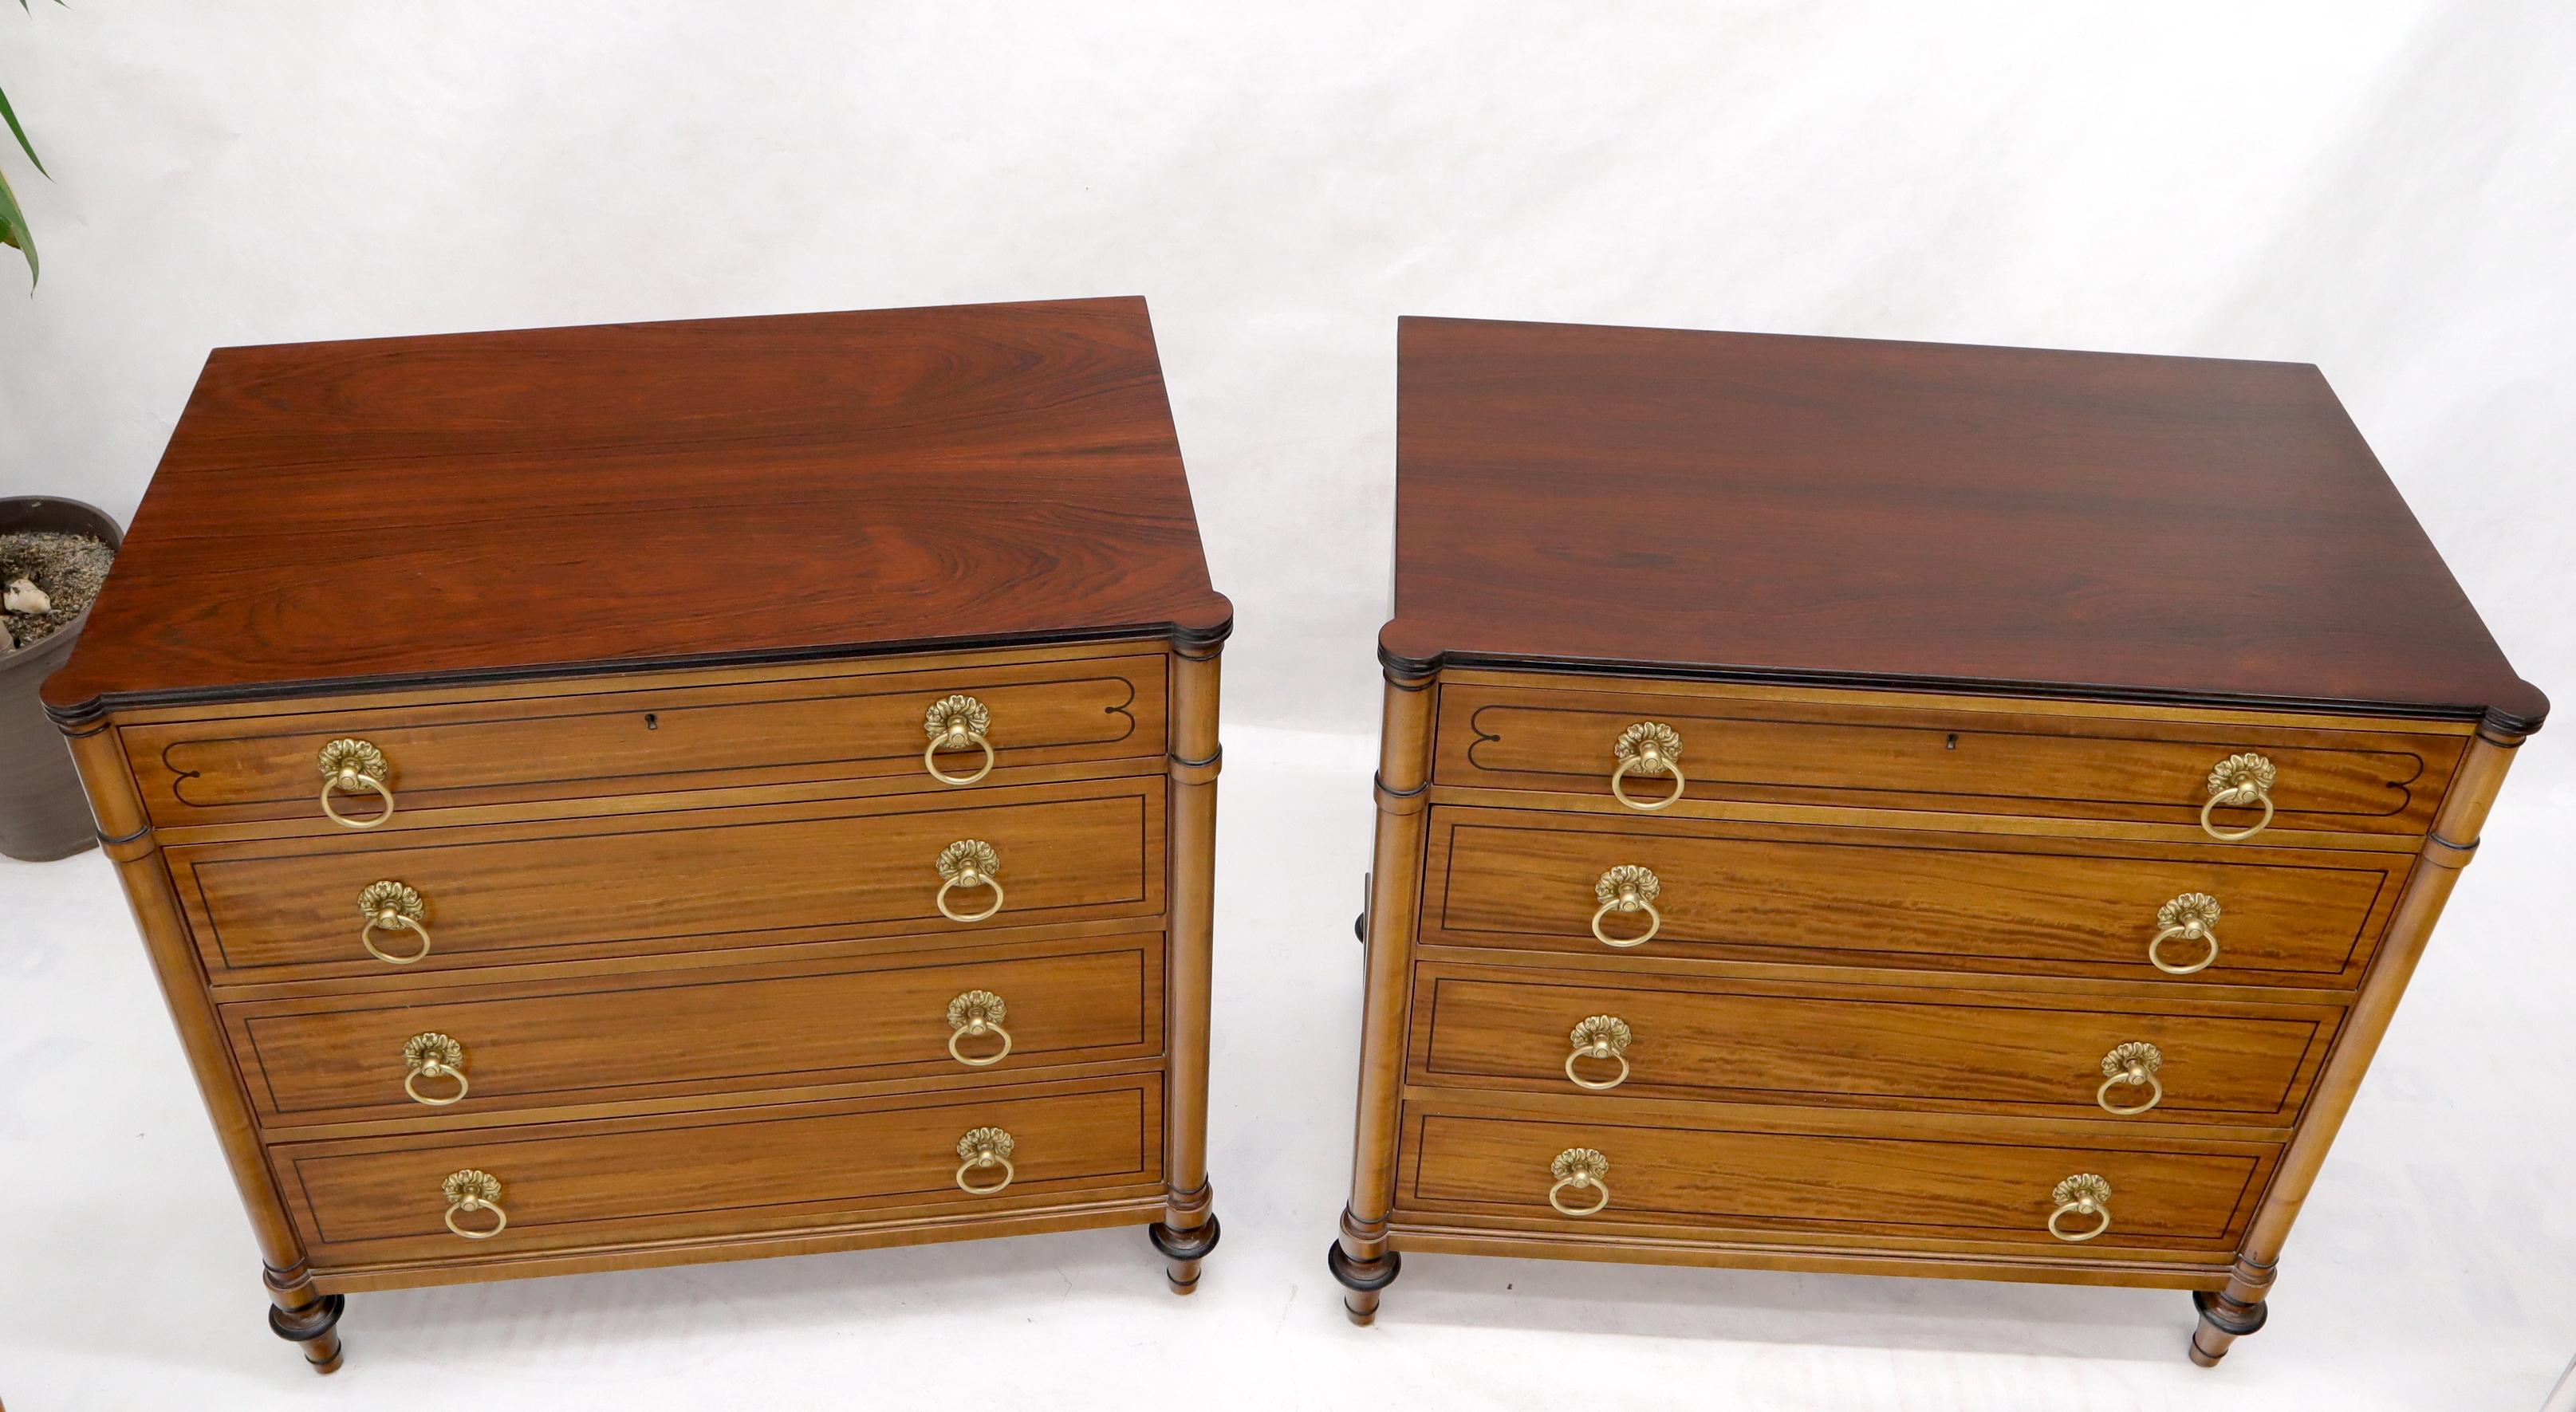 20th Century Pair of Rosewood Tops Satin Wood Heavy Brass Ring Pulls 4-Drawer Bachelor Chests For Sale